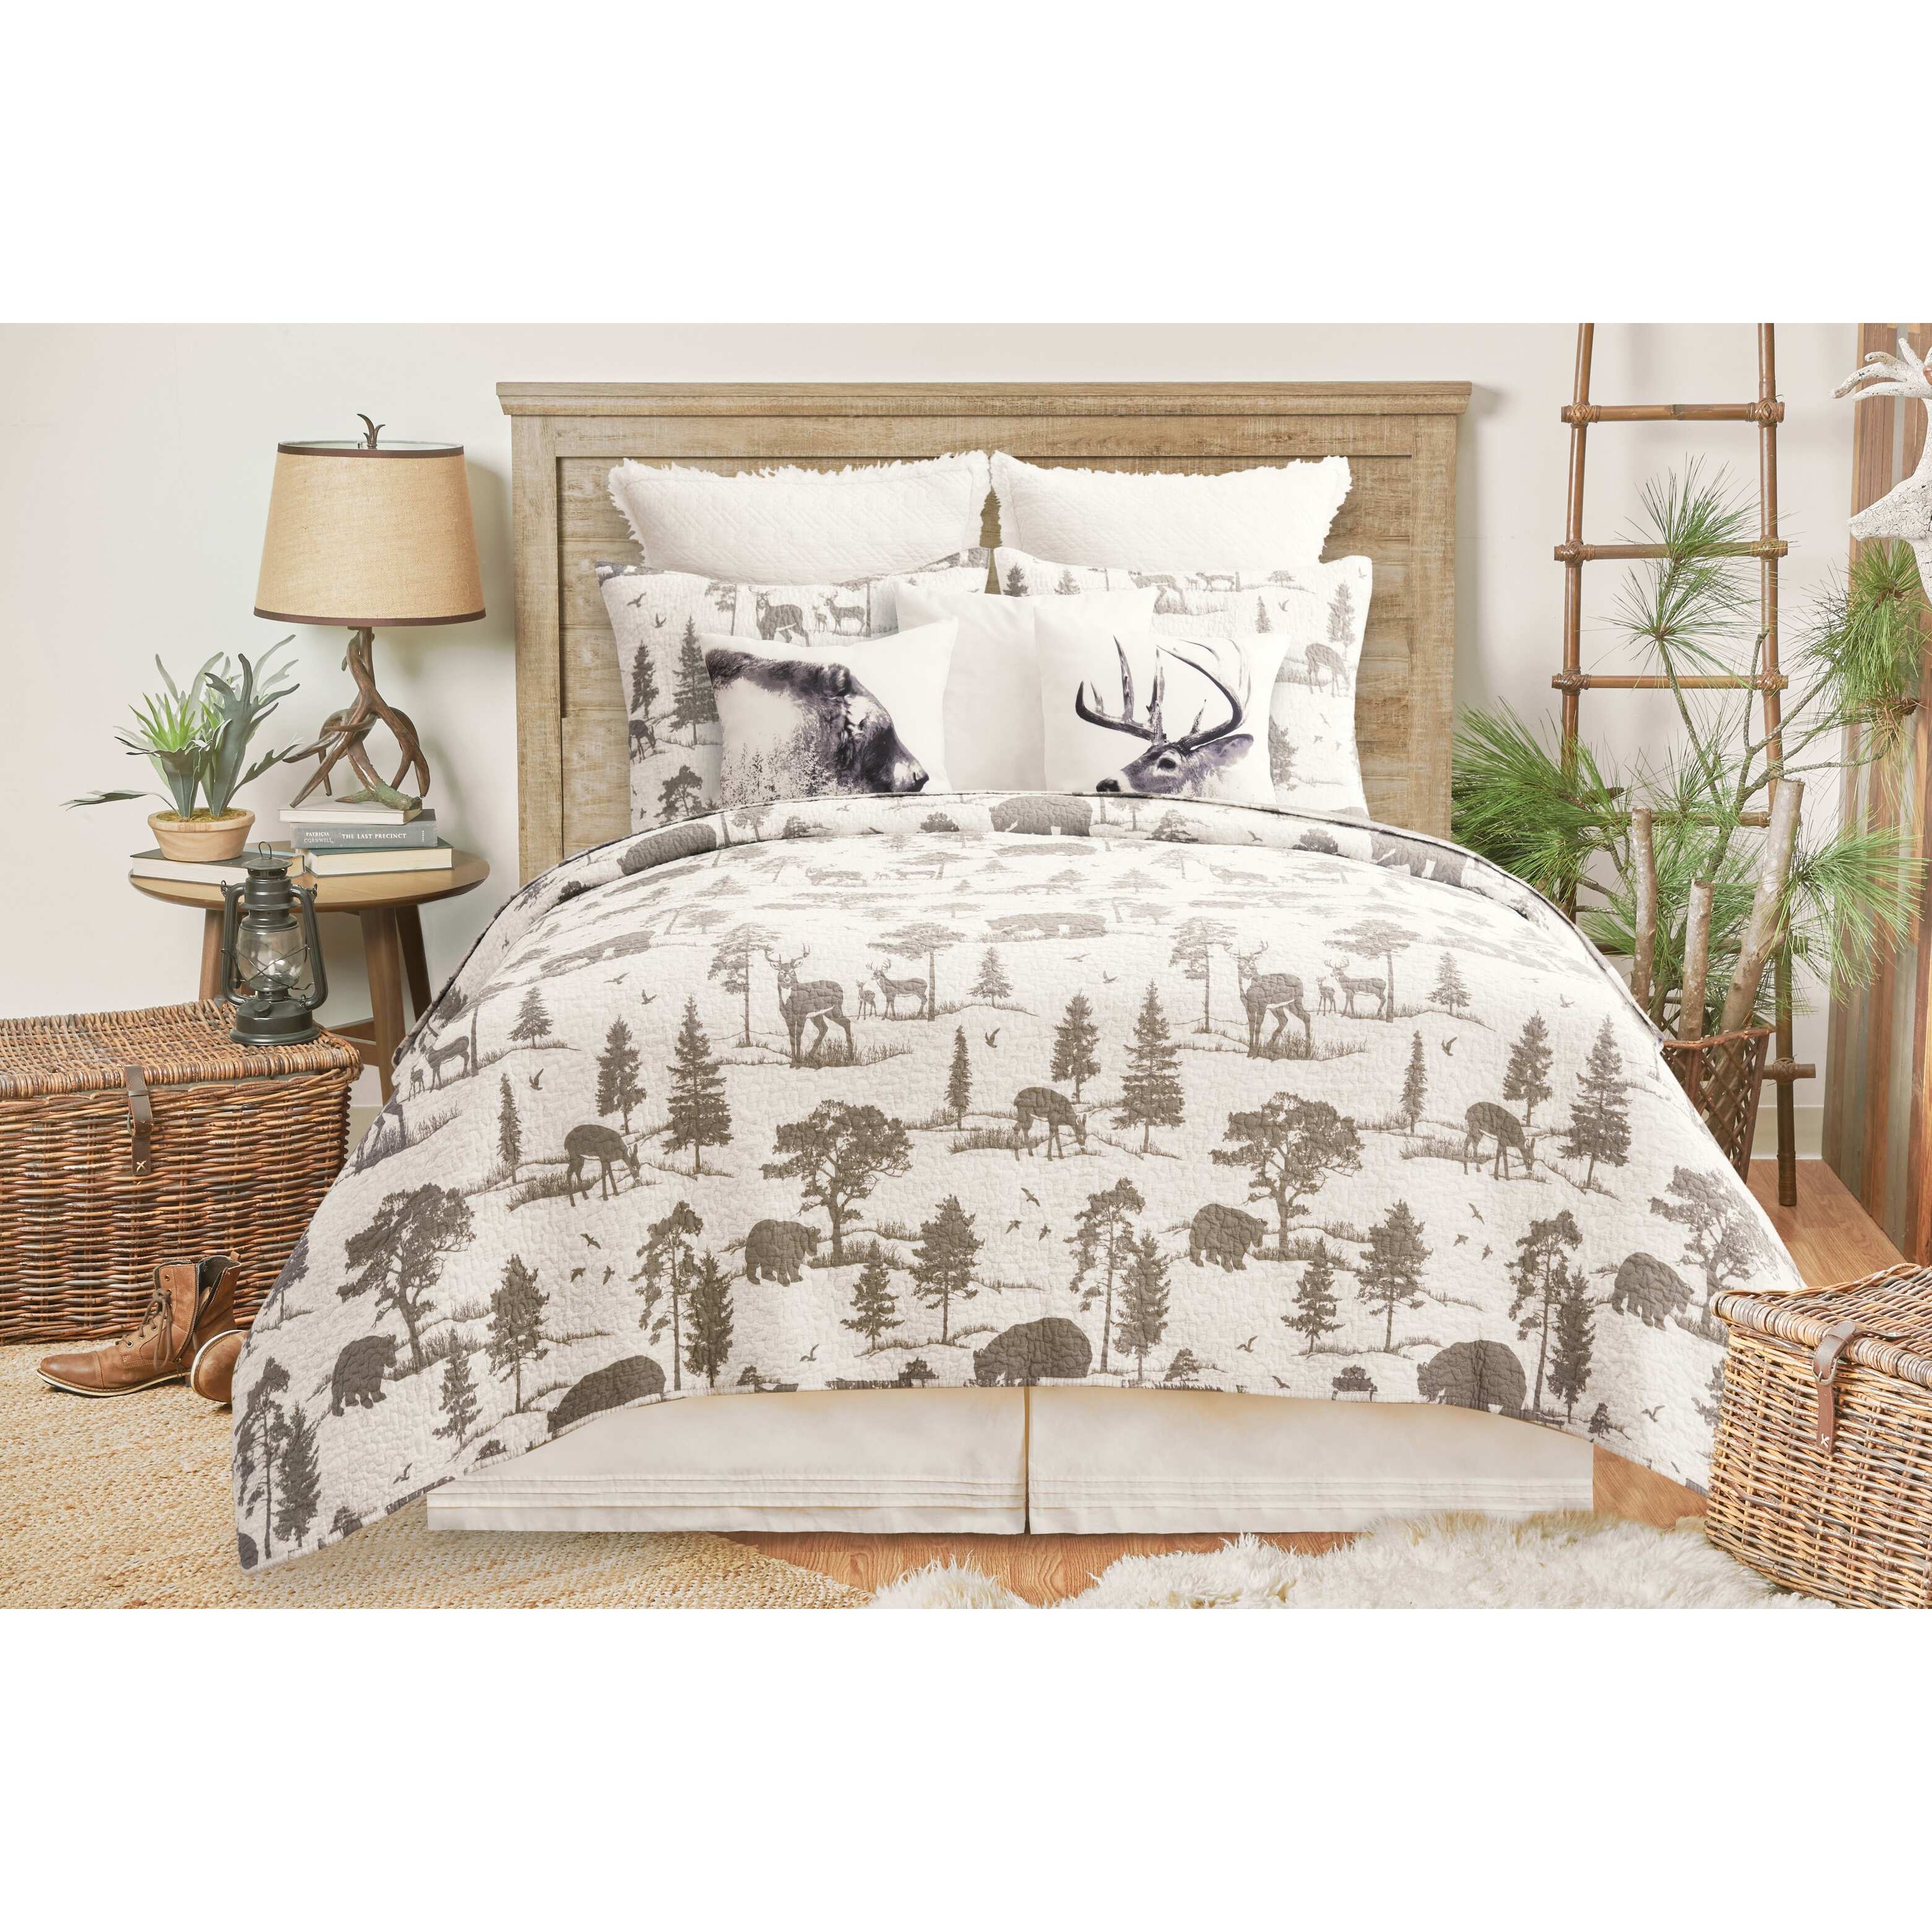 Hillside Royal Rustic Lodge Quilt Bedding Collection